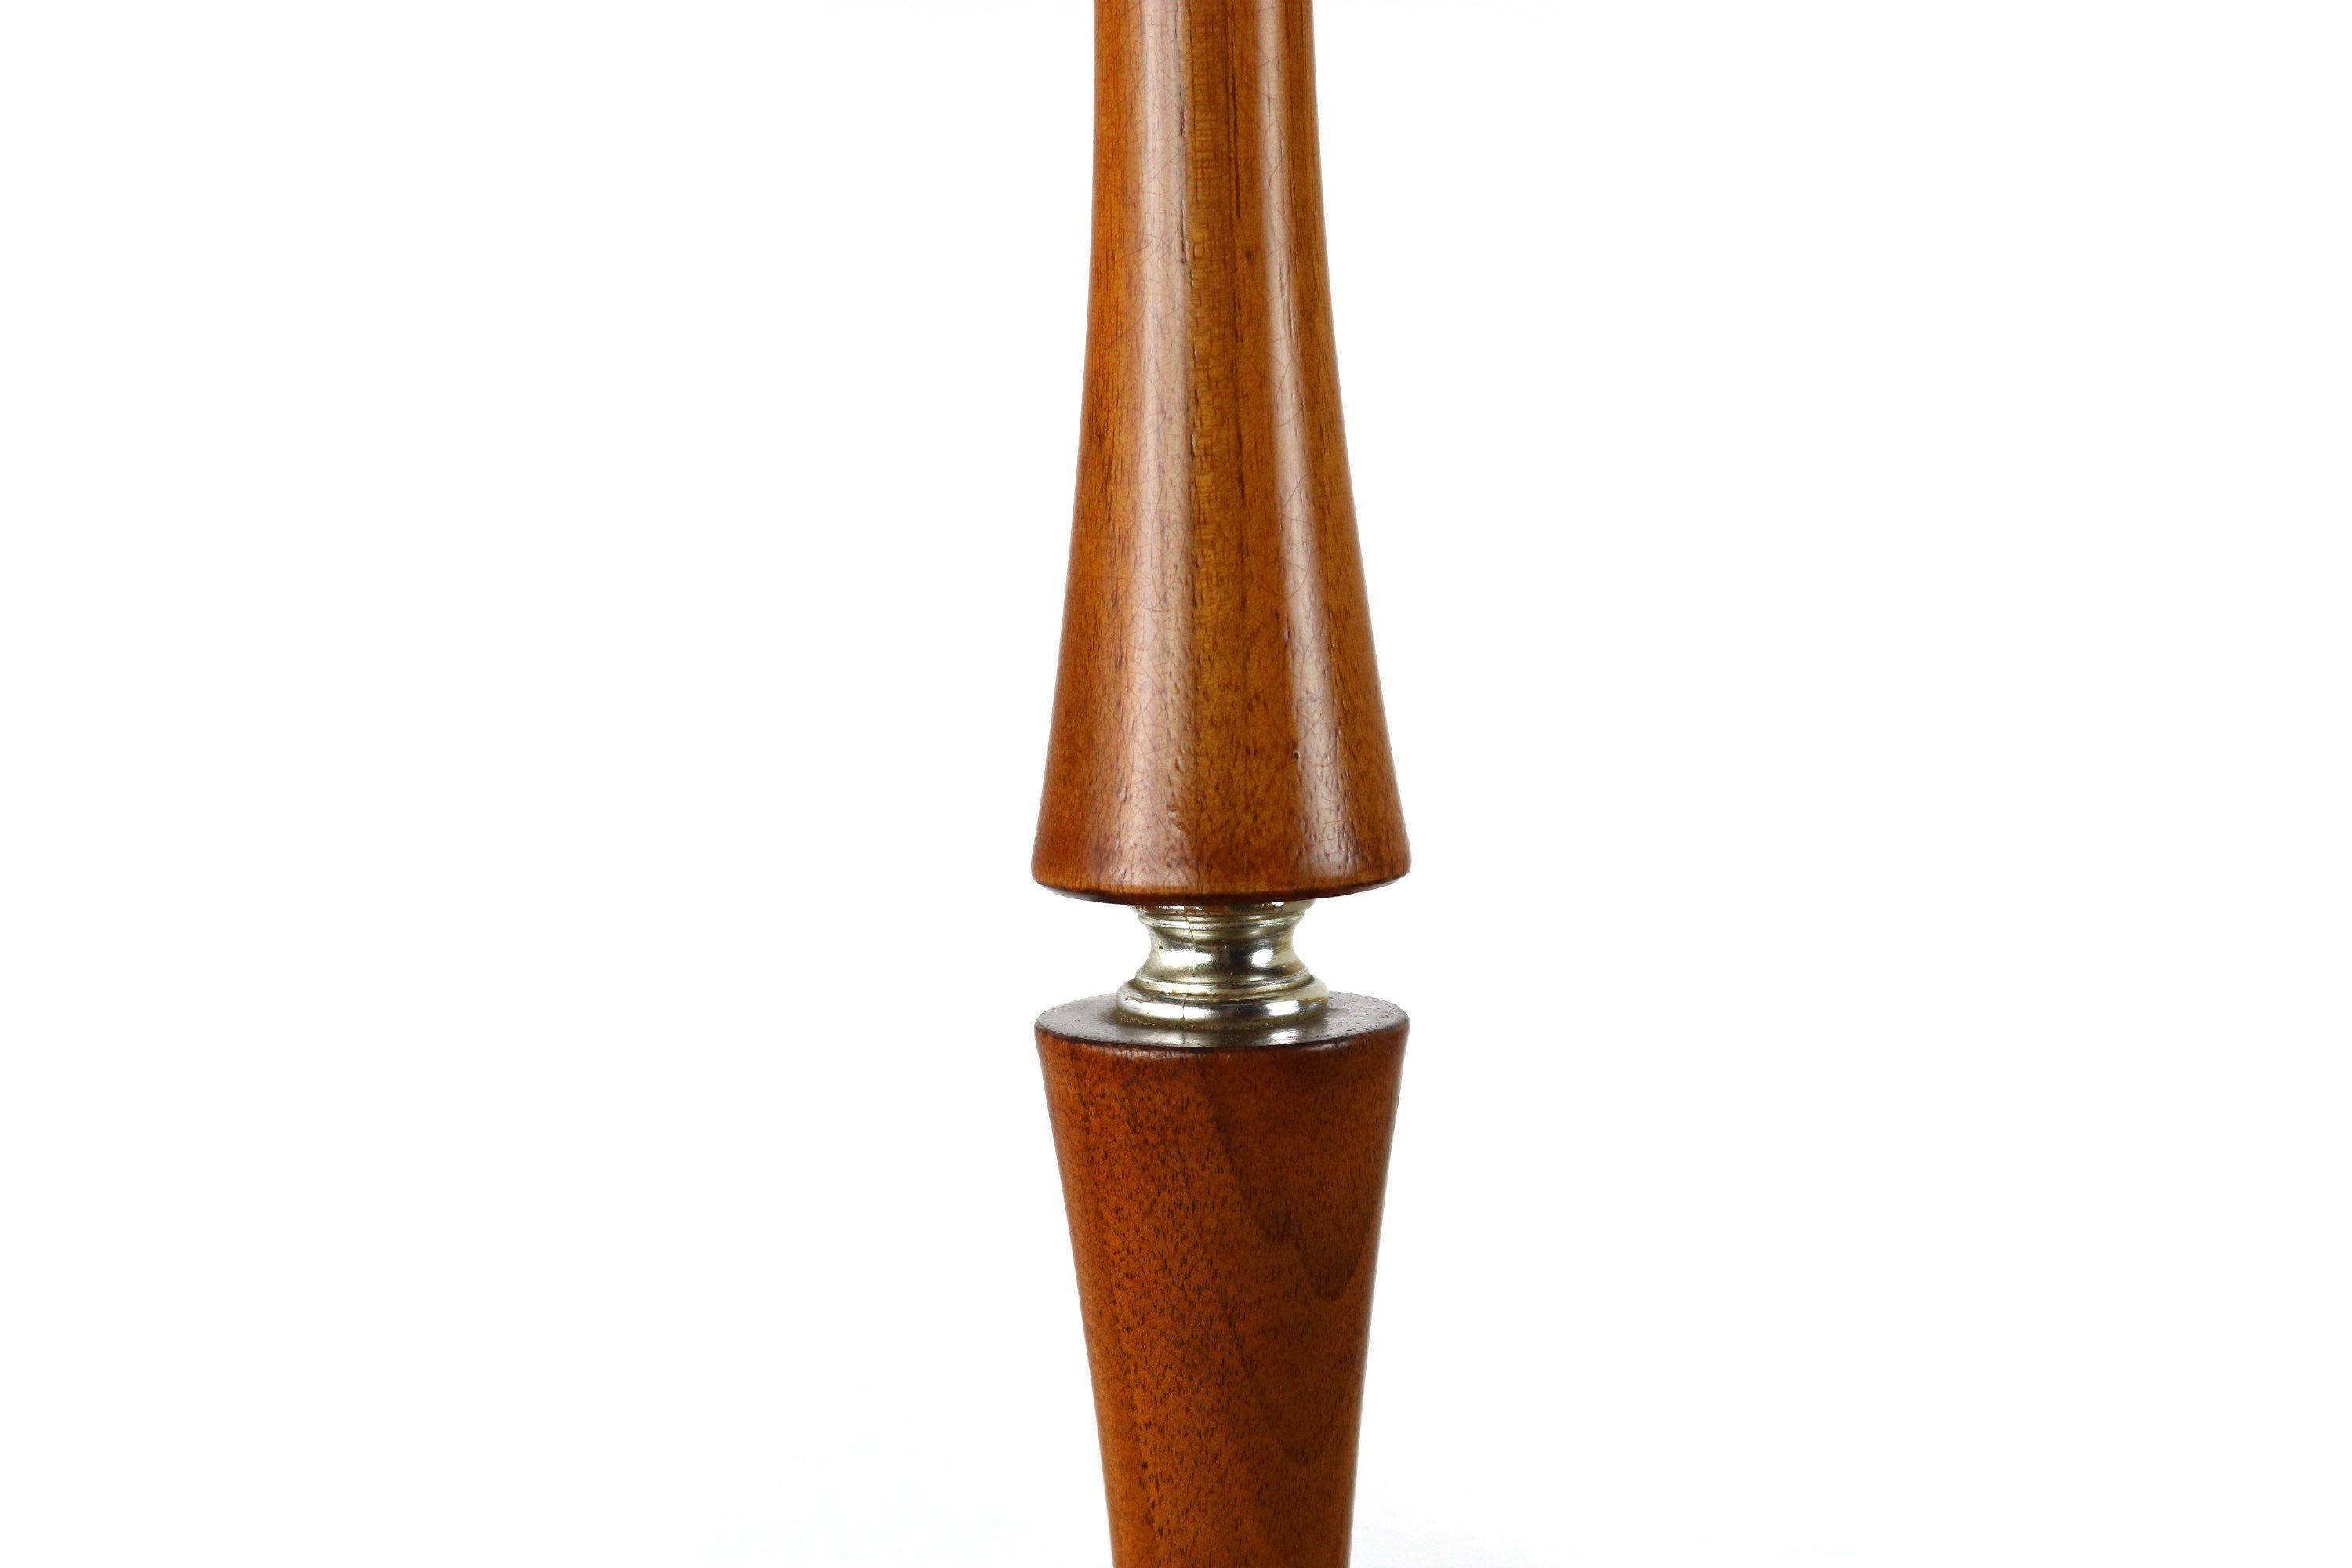 As stylish as it is functional this extraordinary table lamp is in 100% original, vintage condition and aged to perfection. With a visually captivating base constructed of solid teak and a splendid double banding of teak on the light shade all